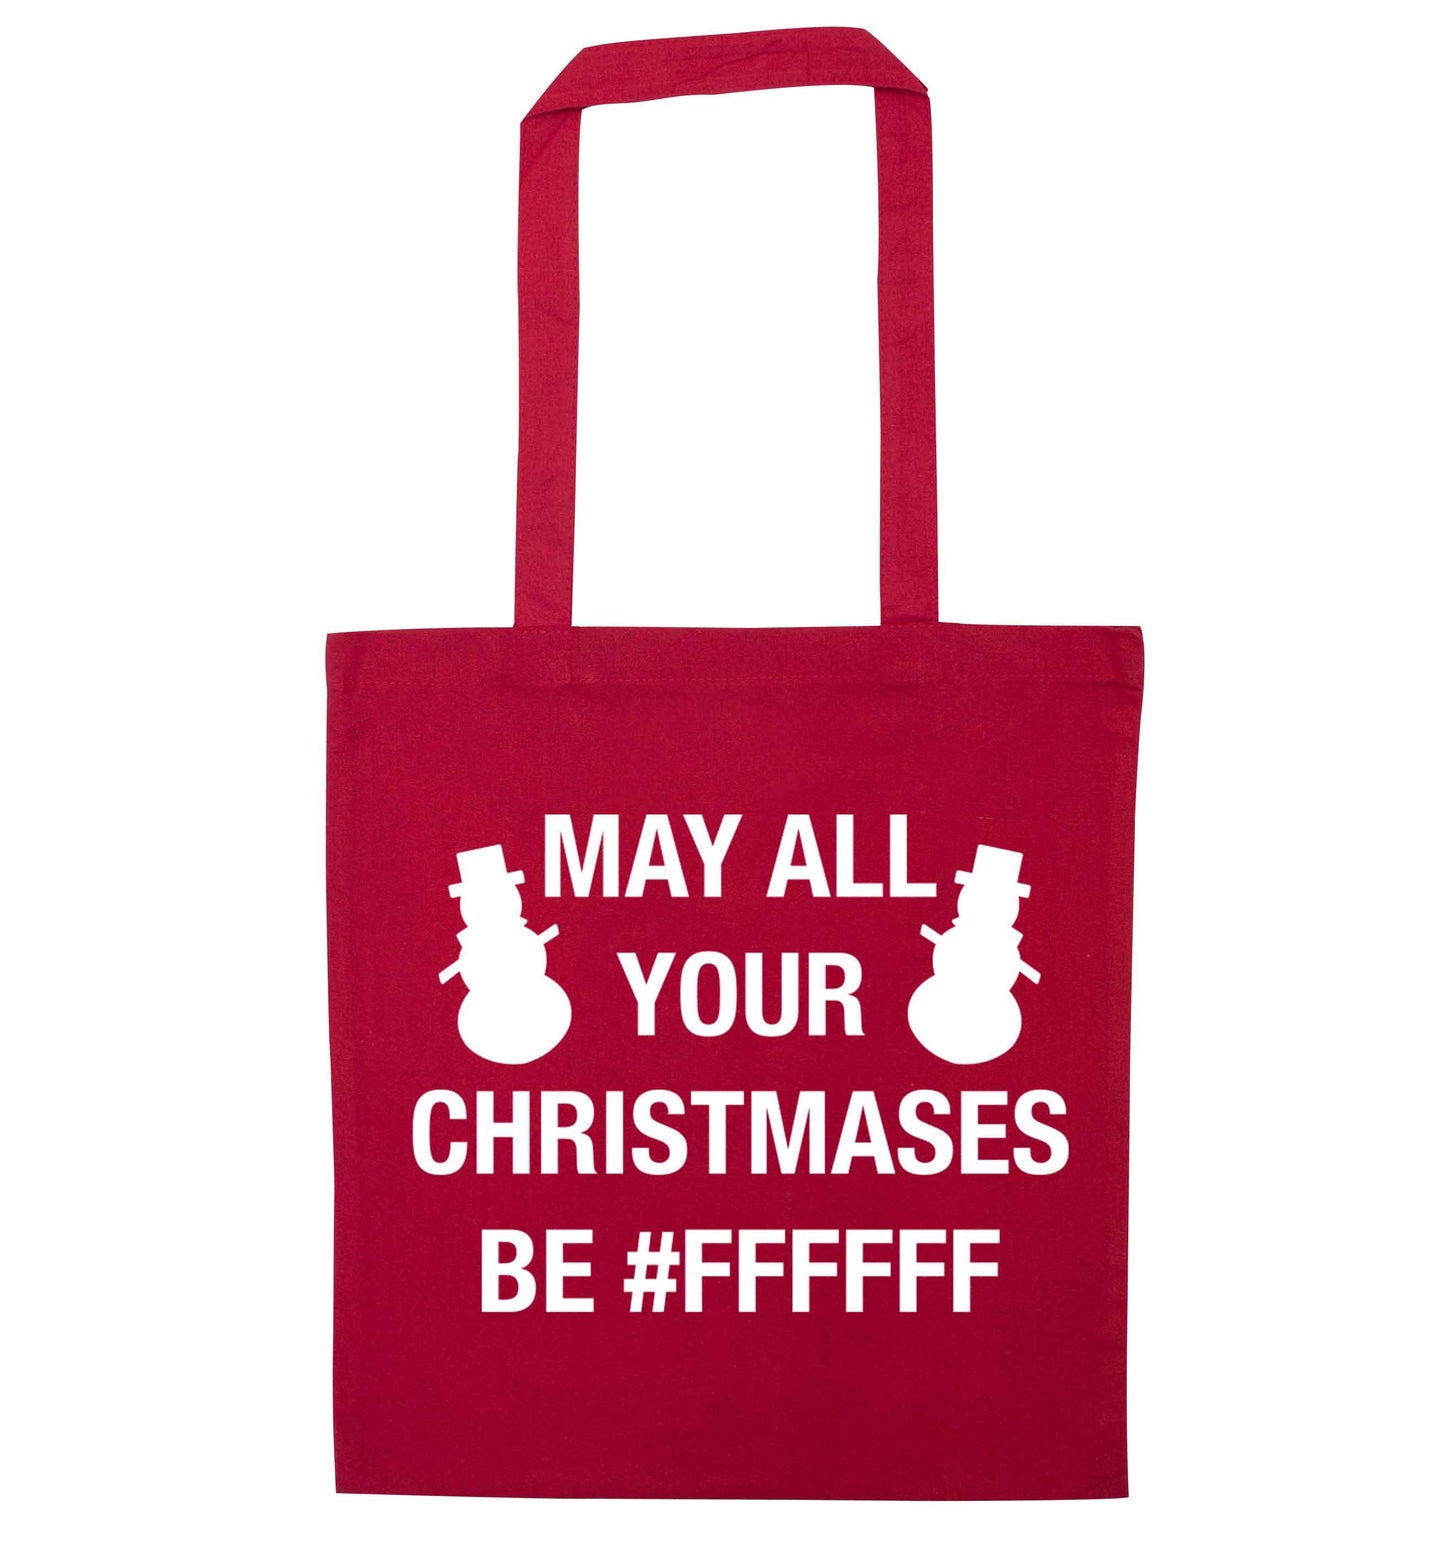 May all your Christmases be #FFFFFF red tote bag